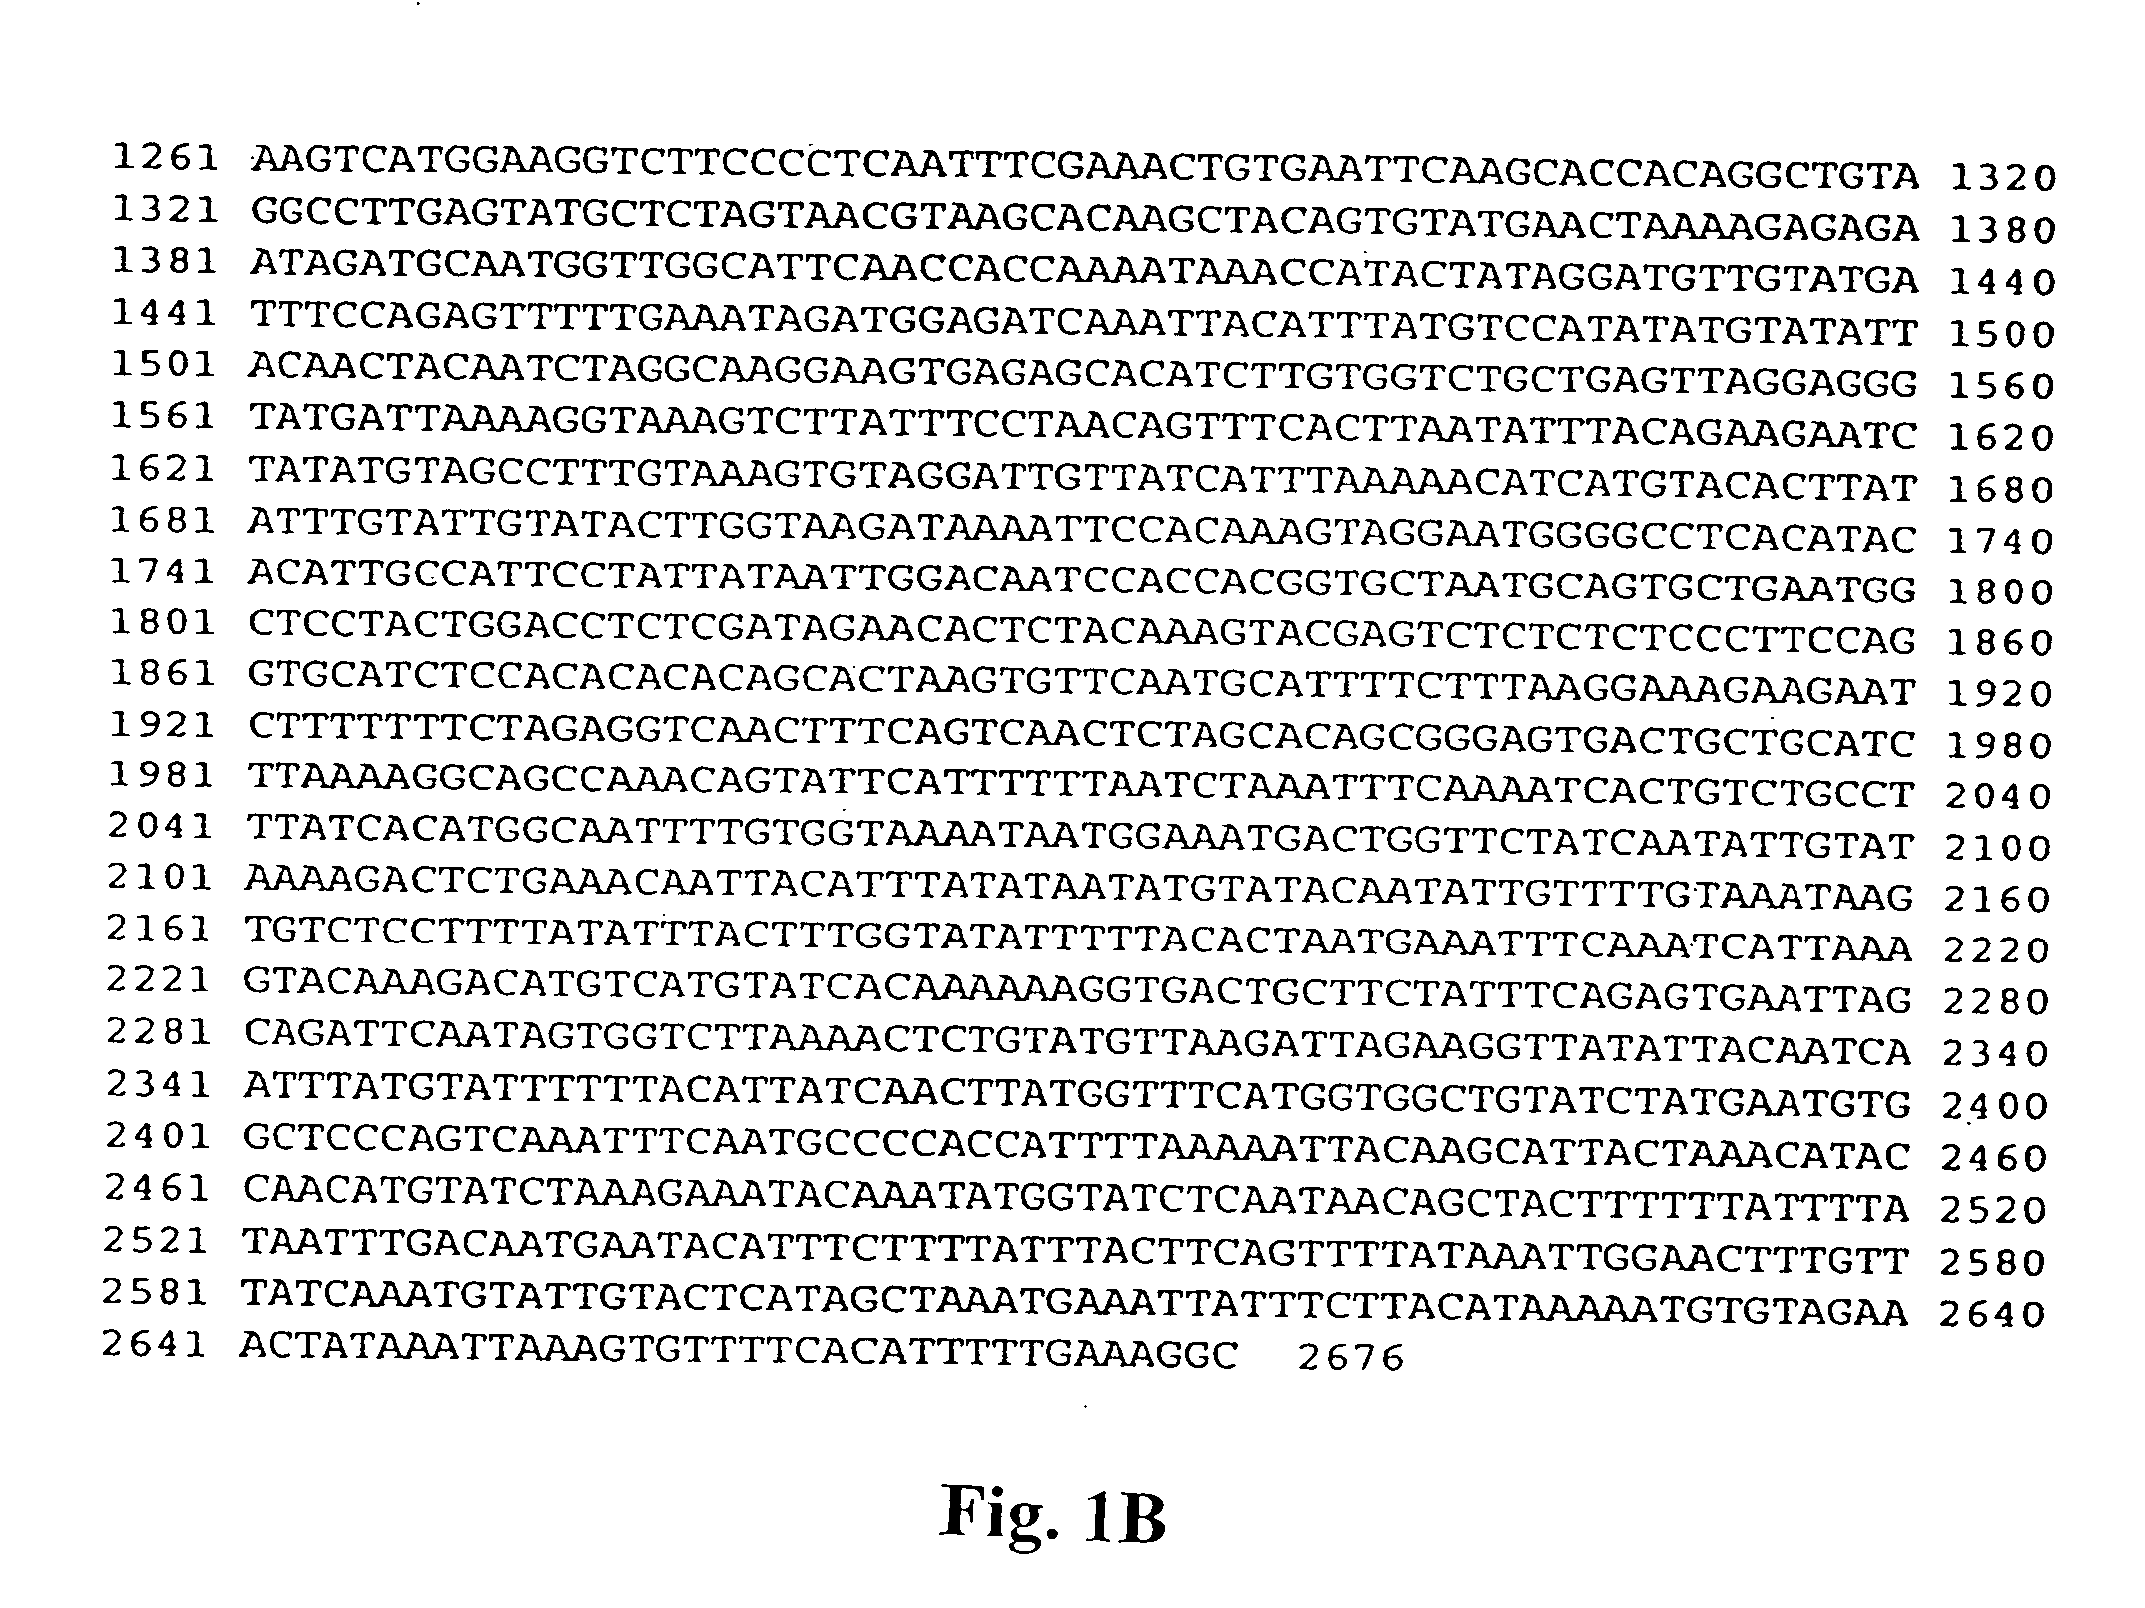 Methods to identify growth differentiation factor (GDF) receptors